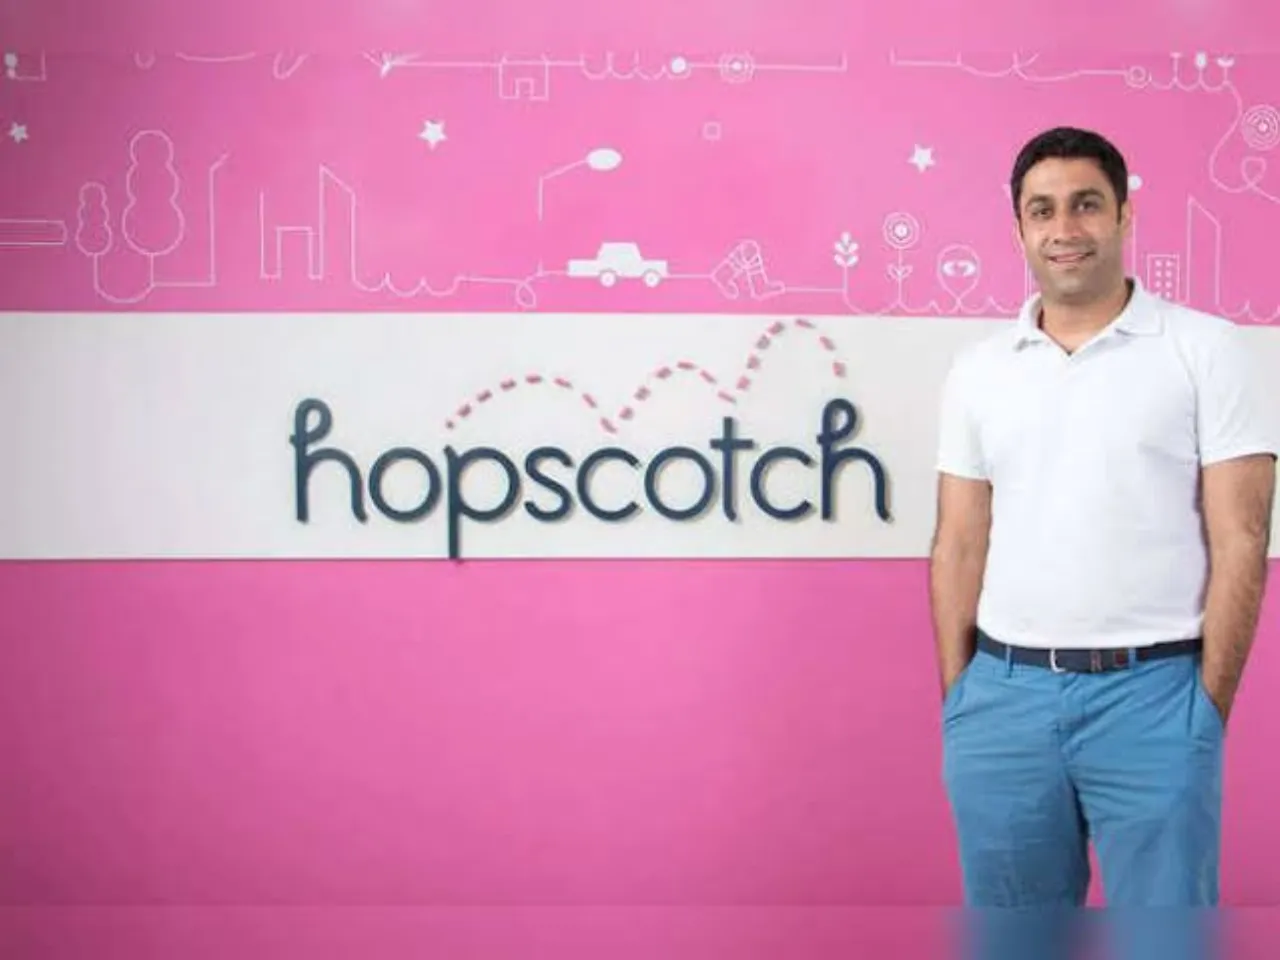 Amazon, Facebook Co-founder , others invests in Hopscotch